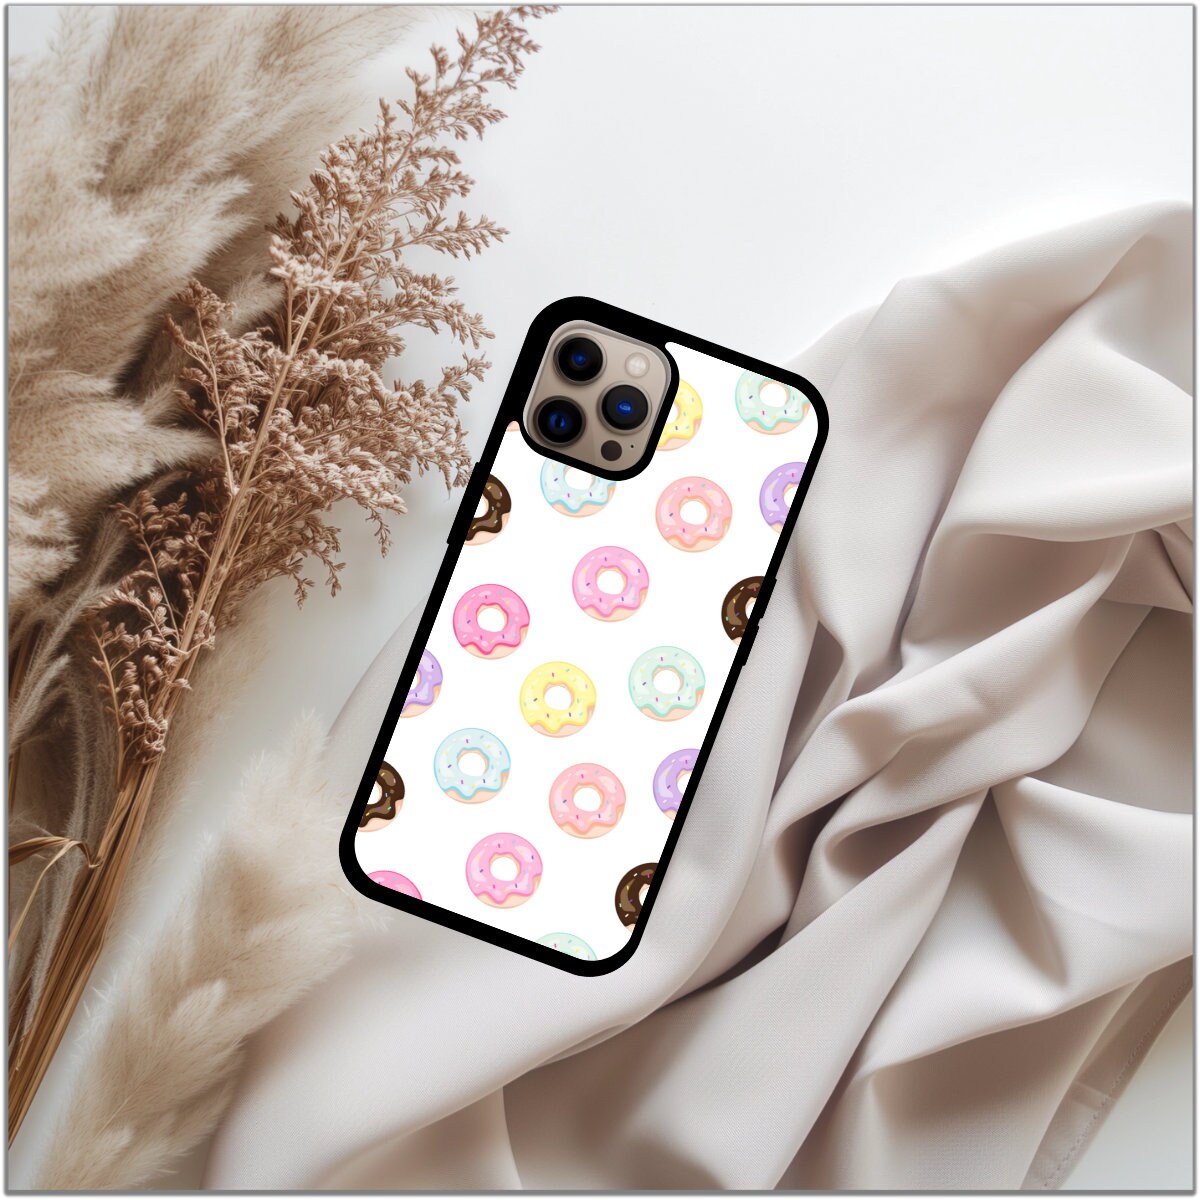 Donut Phone Case perfect gift for her - cute phone case - best birthday gift - iphone case - sweets phone case - candy phone case -